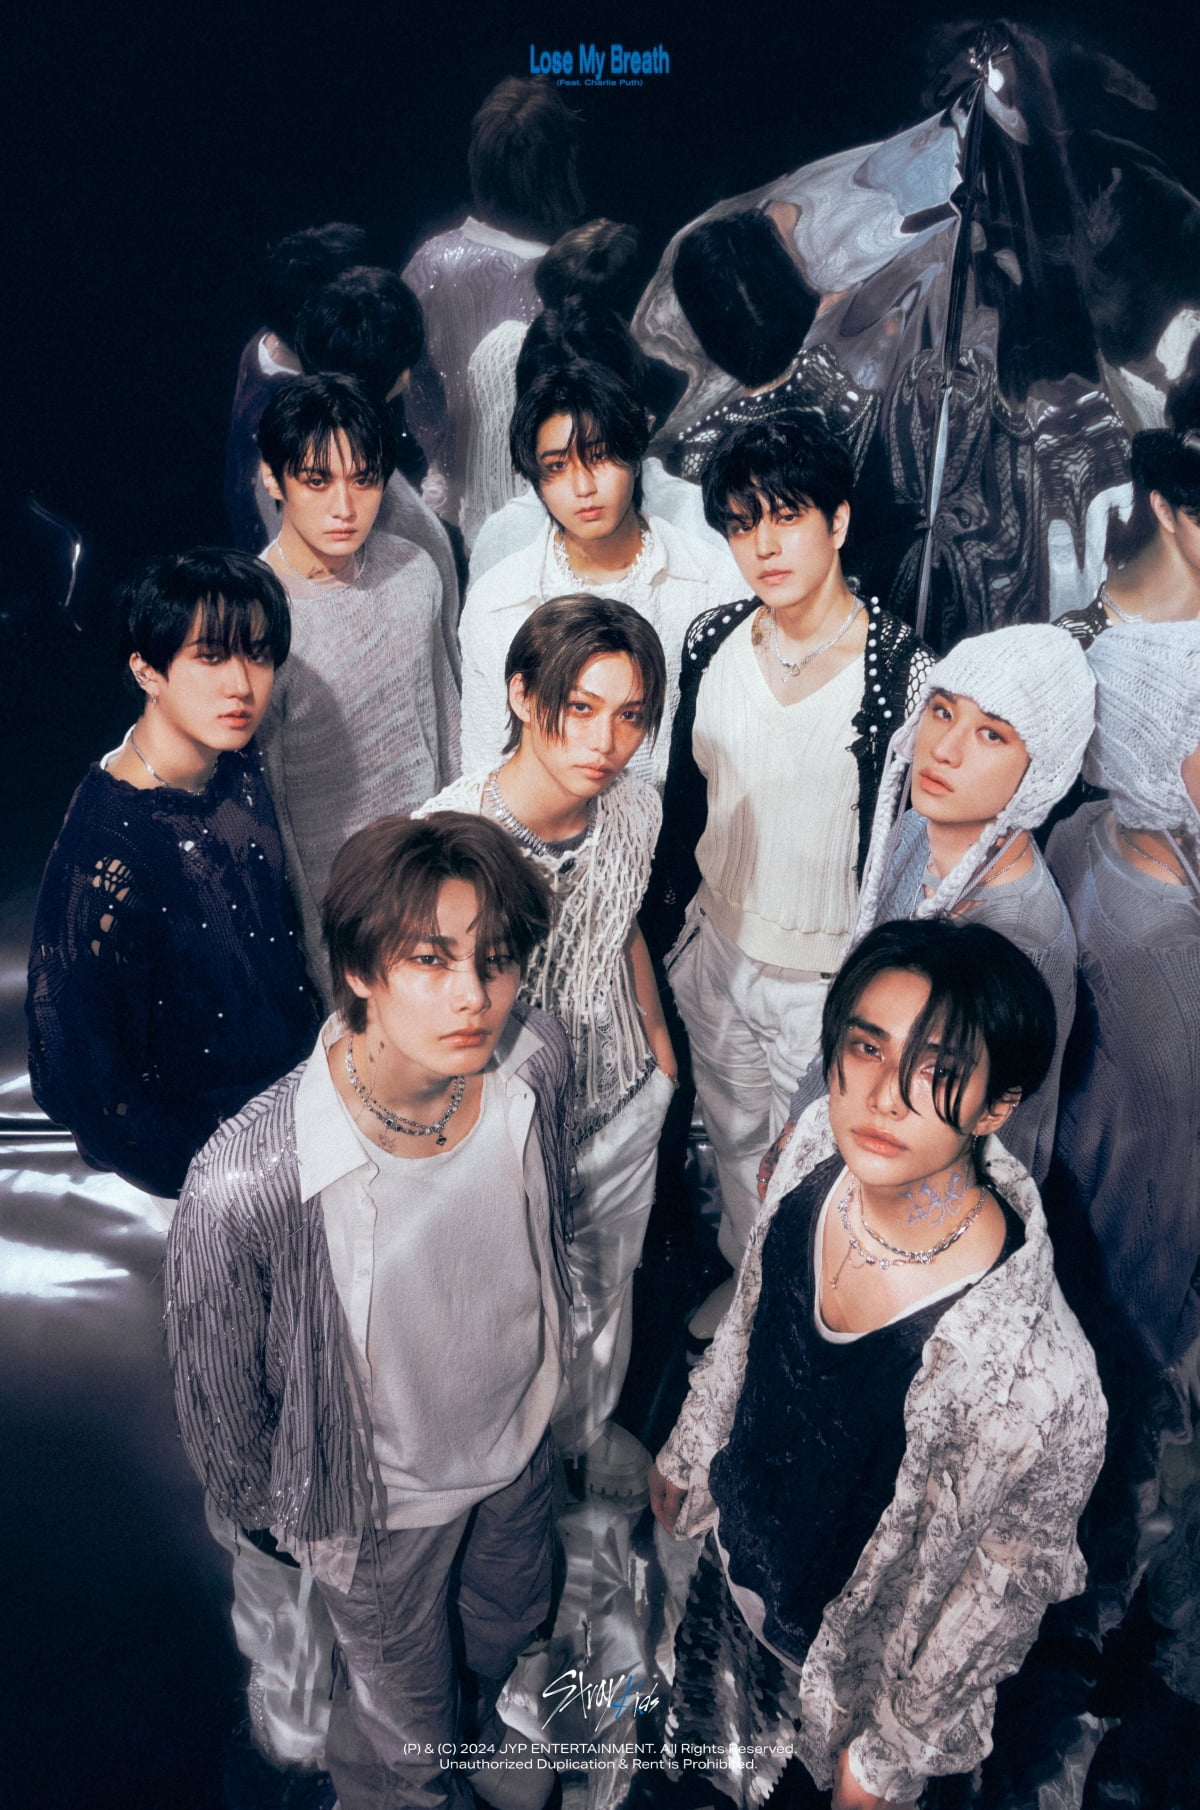 Stray Kids x Charlie Puth collaboration explodes with curiosity